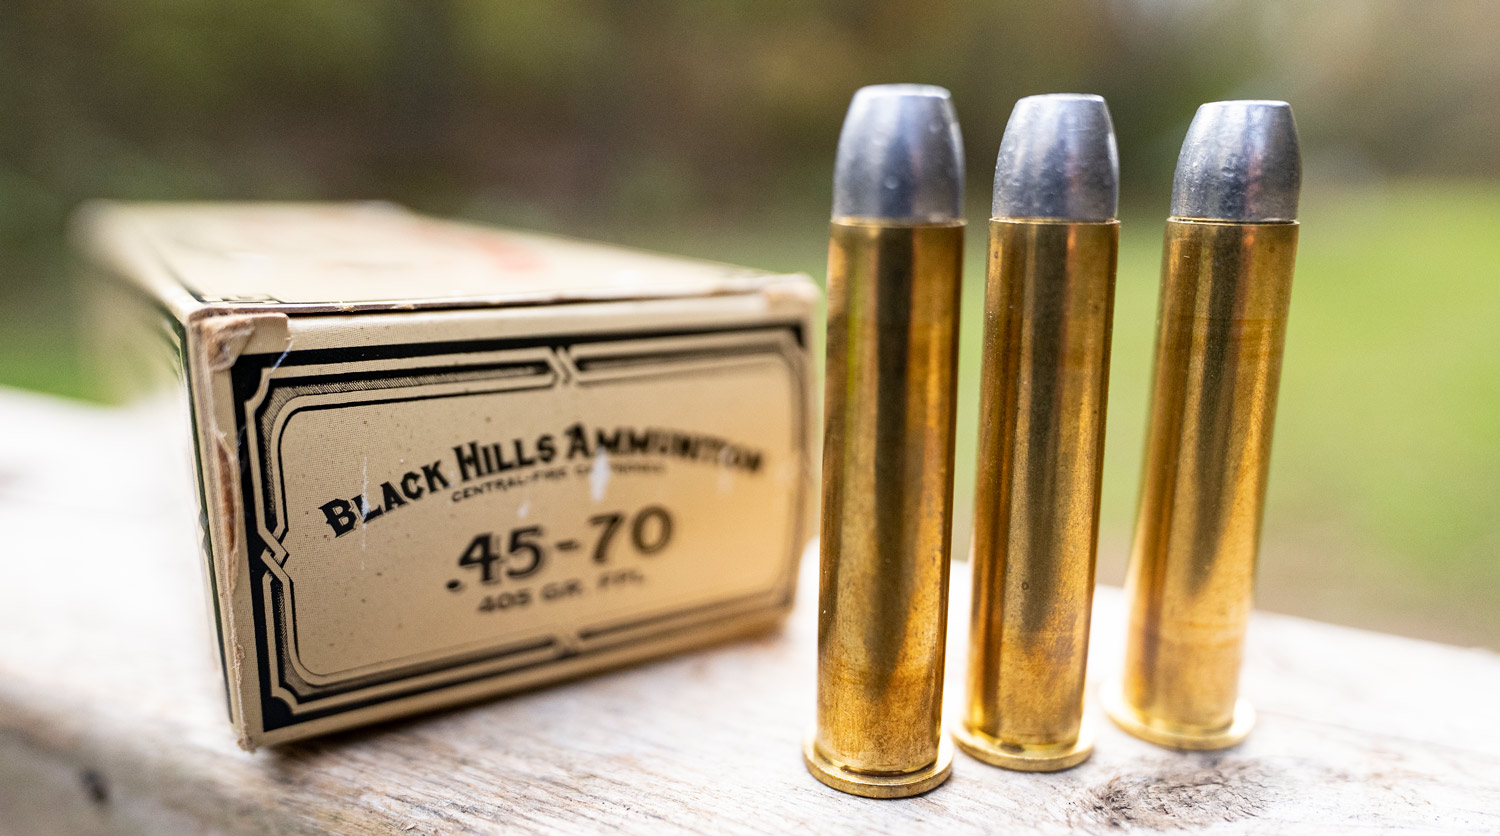 A box of 45-70 ammo made by Black Hills Ammunition